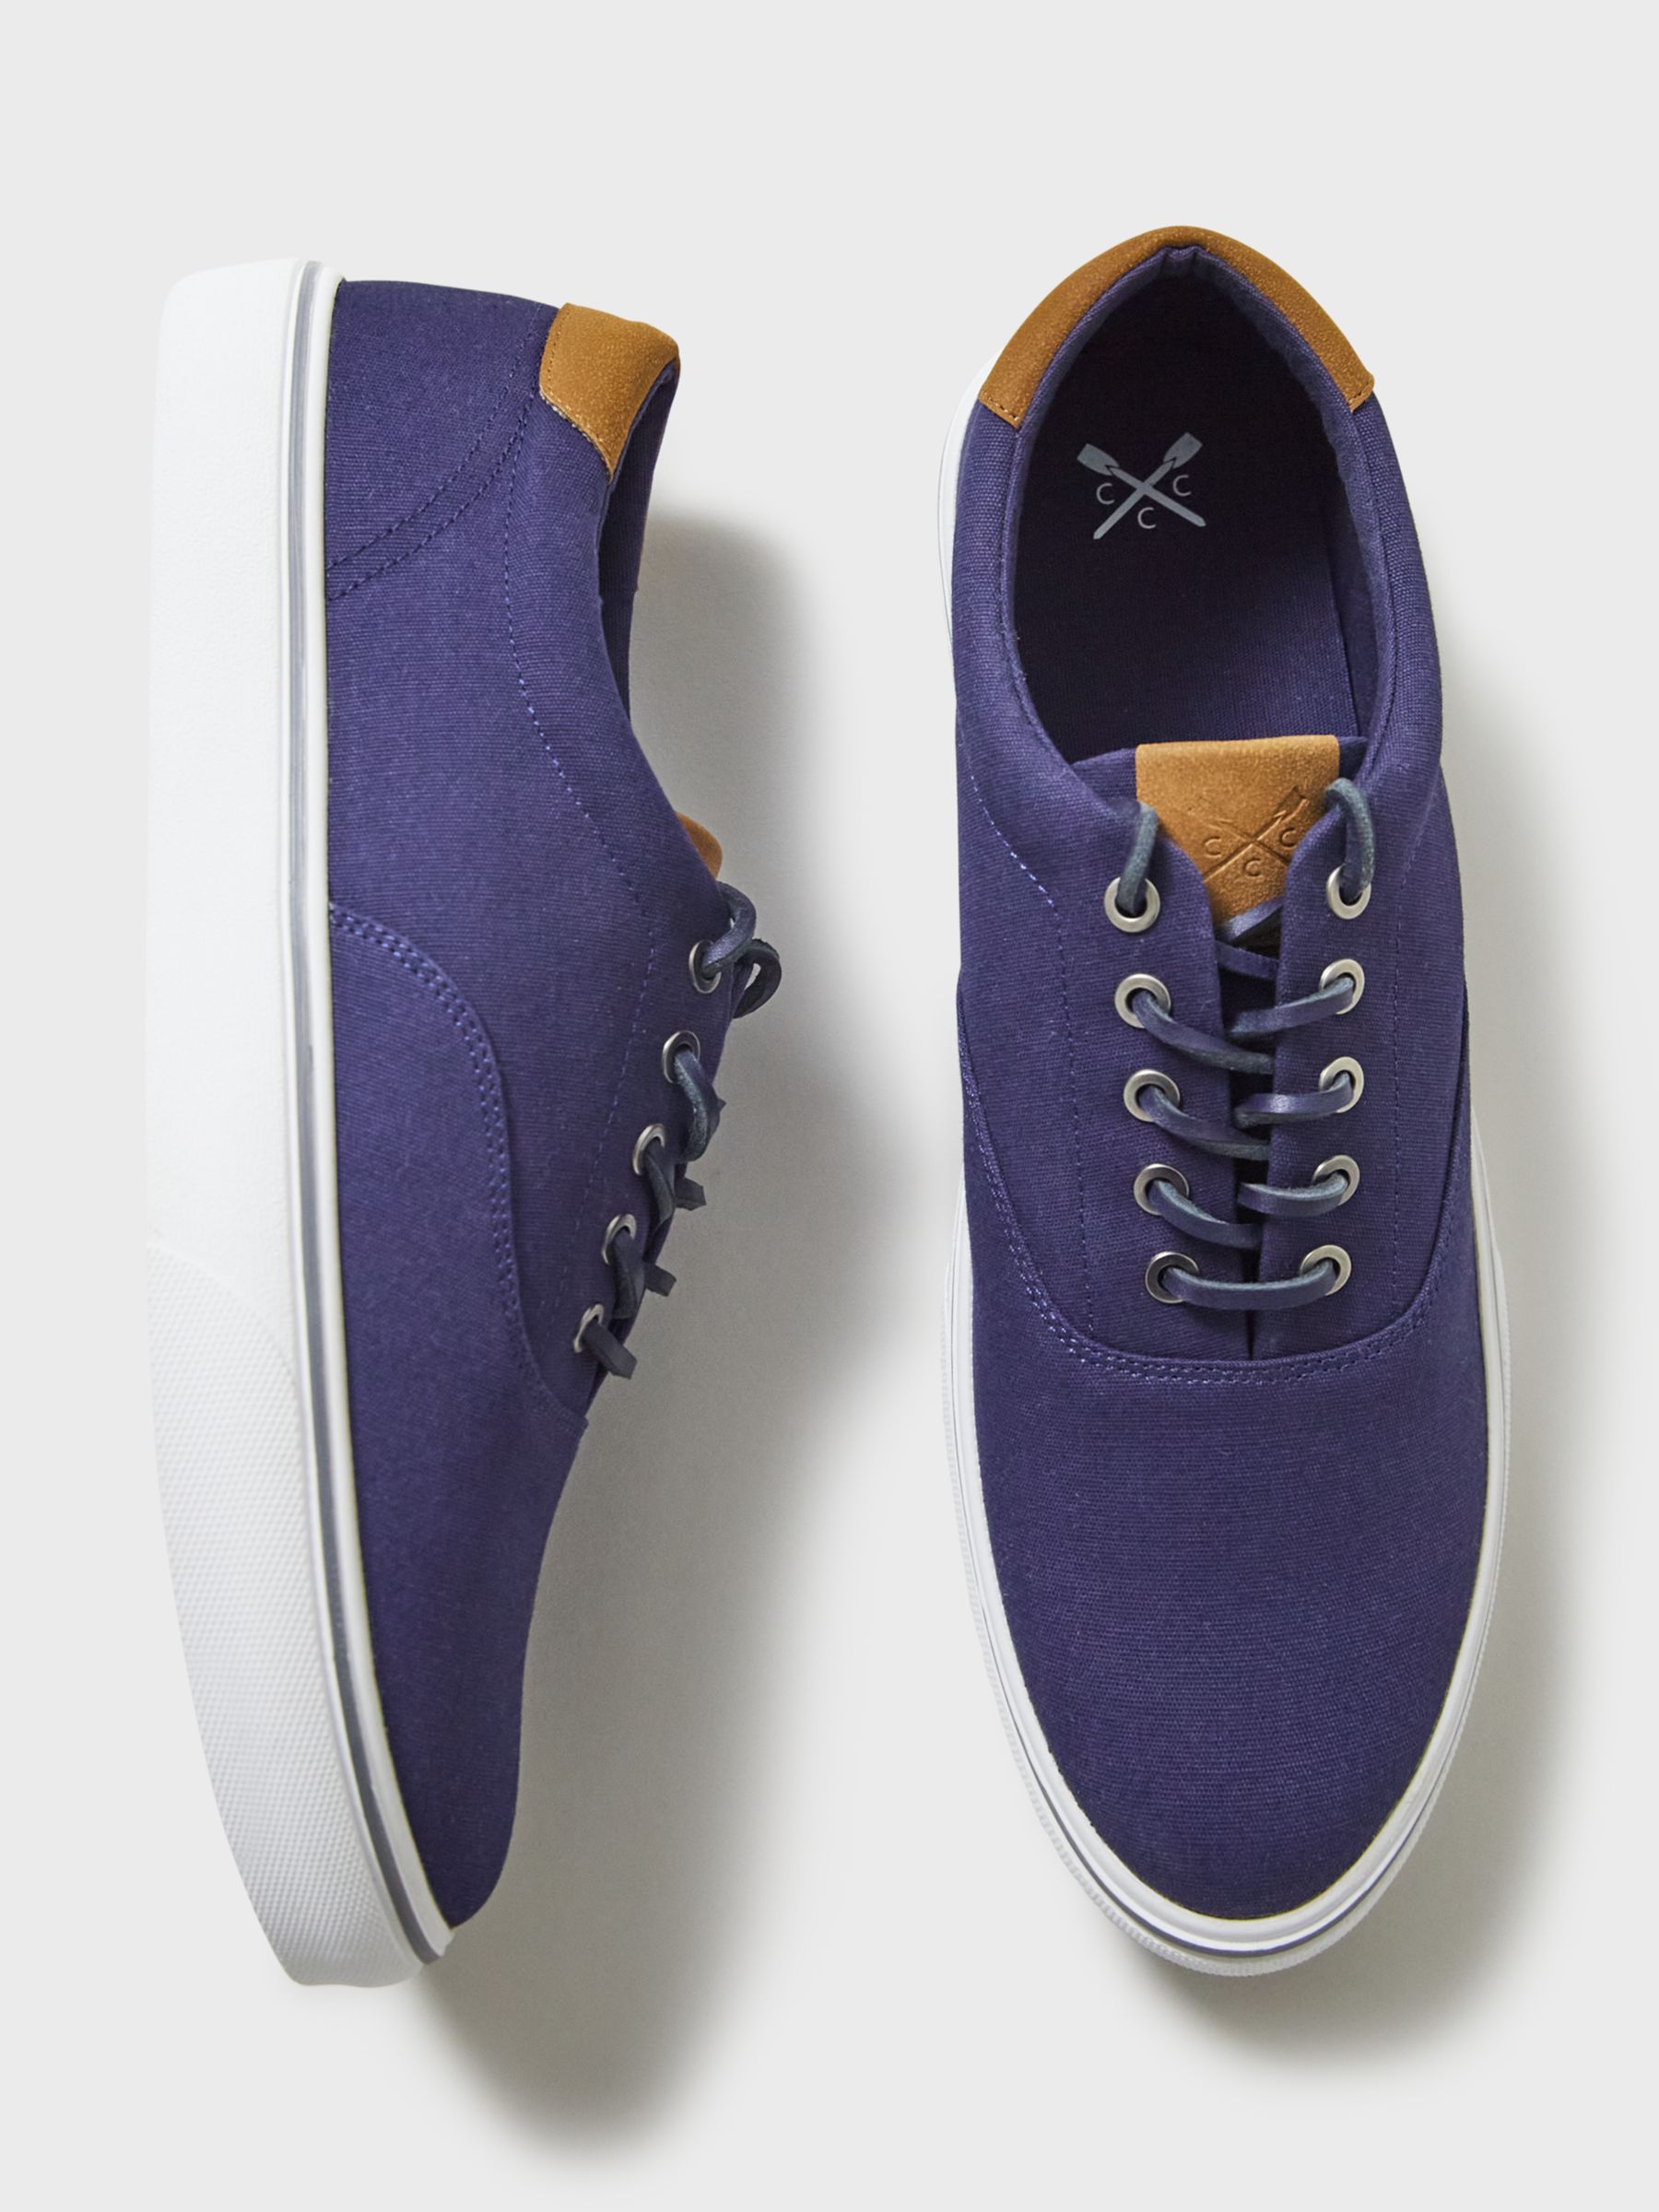 Crew Clothing Oxford Canvas Trainers, Dark Blue, 11